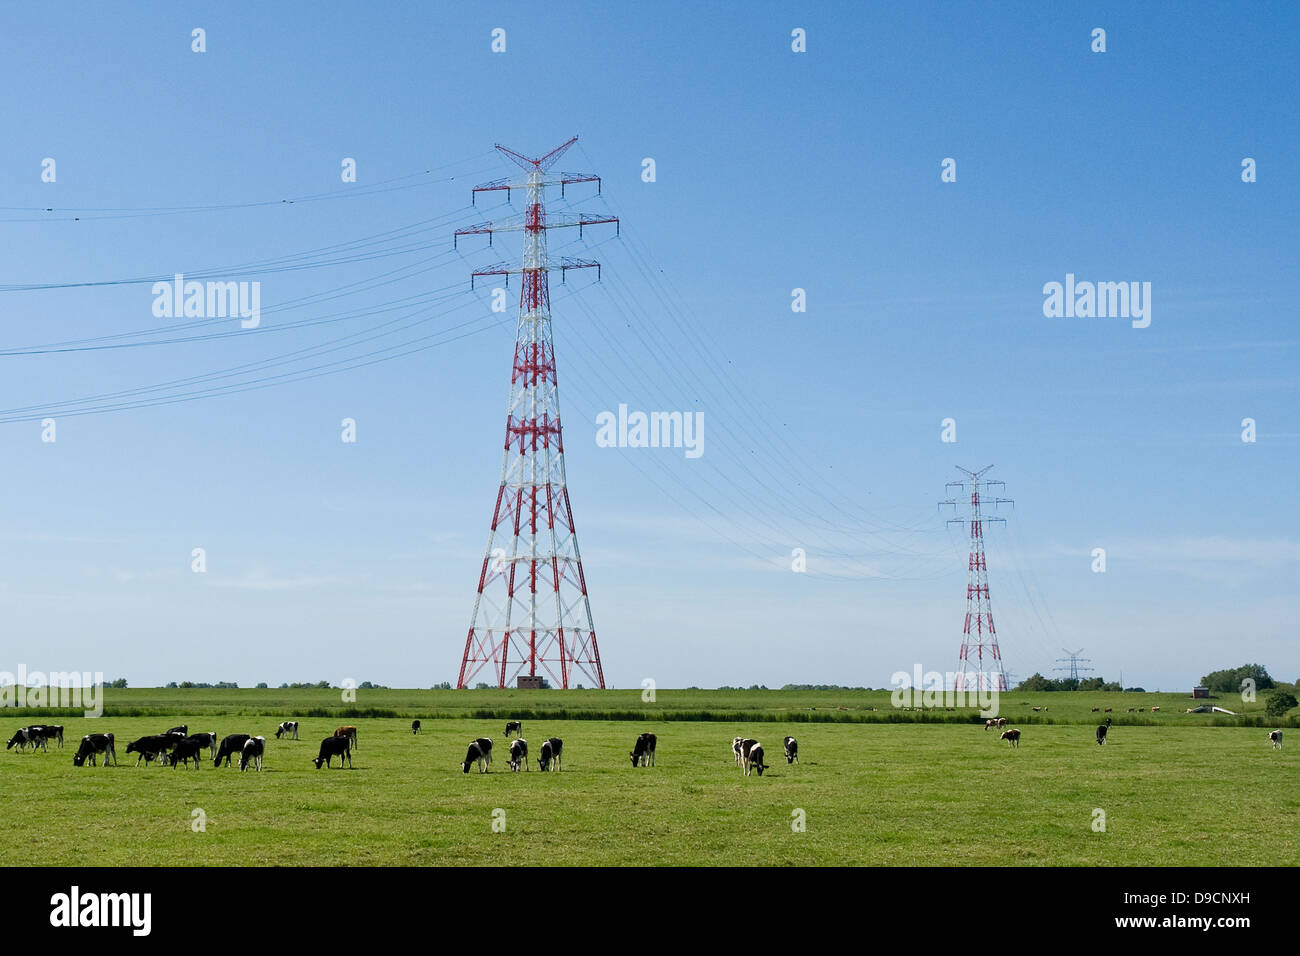 Stream masts on a pasture with cows, Electricity pylons on a pasture with cows, Stock Photo